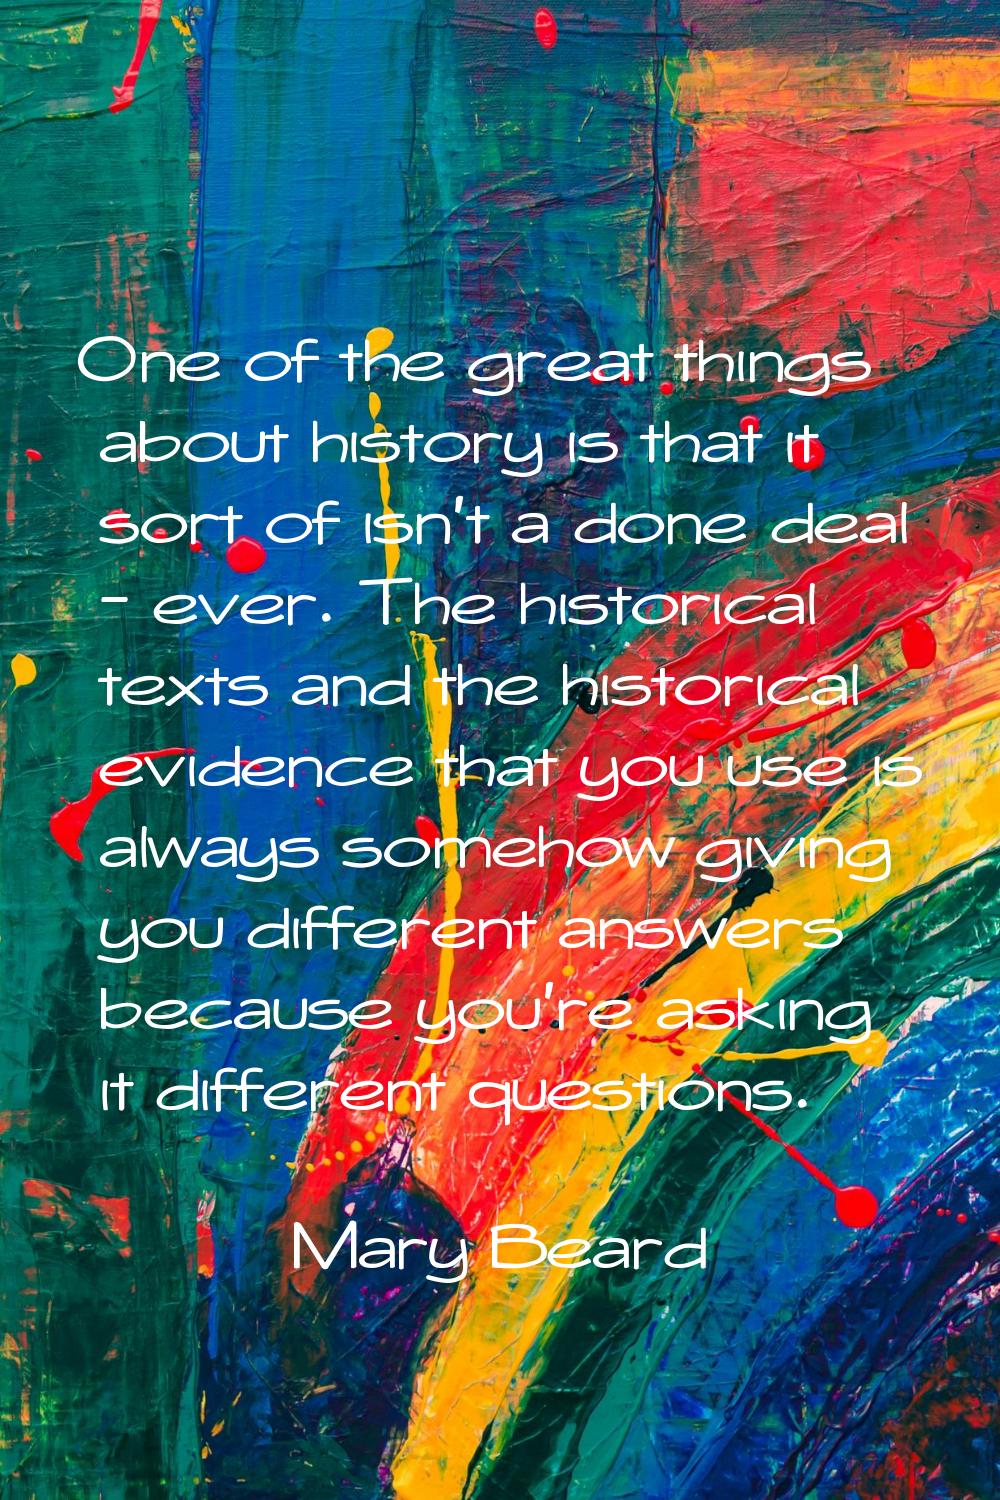 One of the great things about history is that it sort of isn't a done deal - ever. The historical t